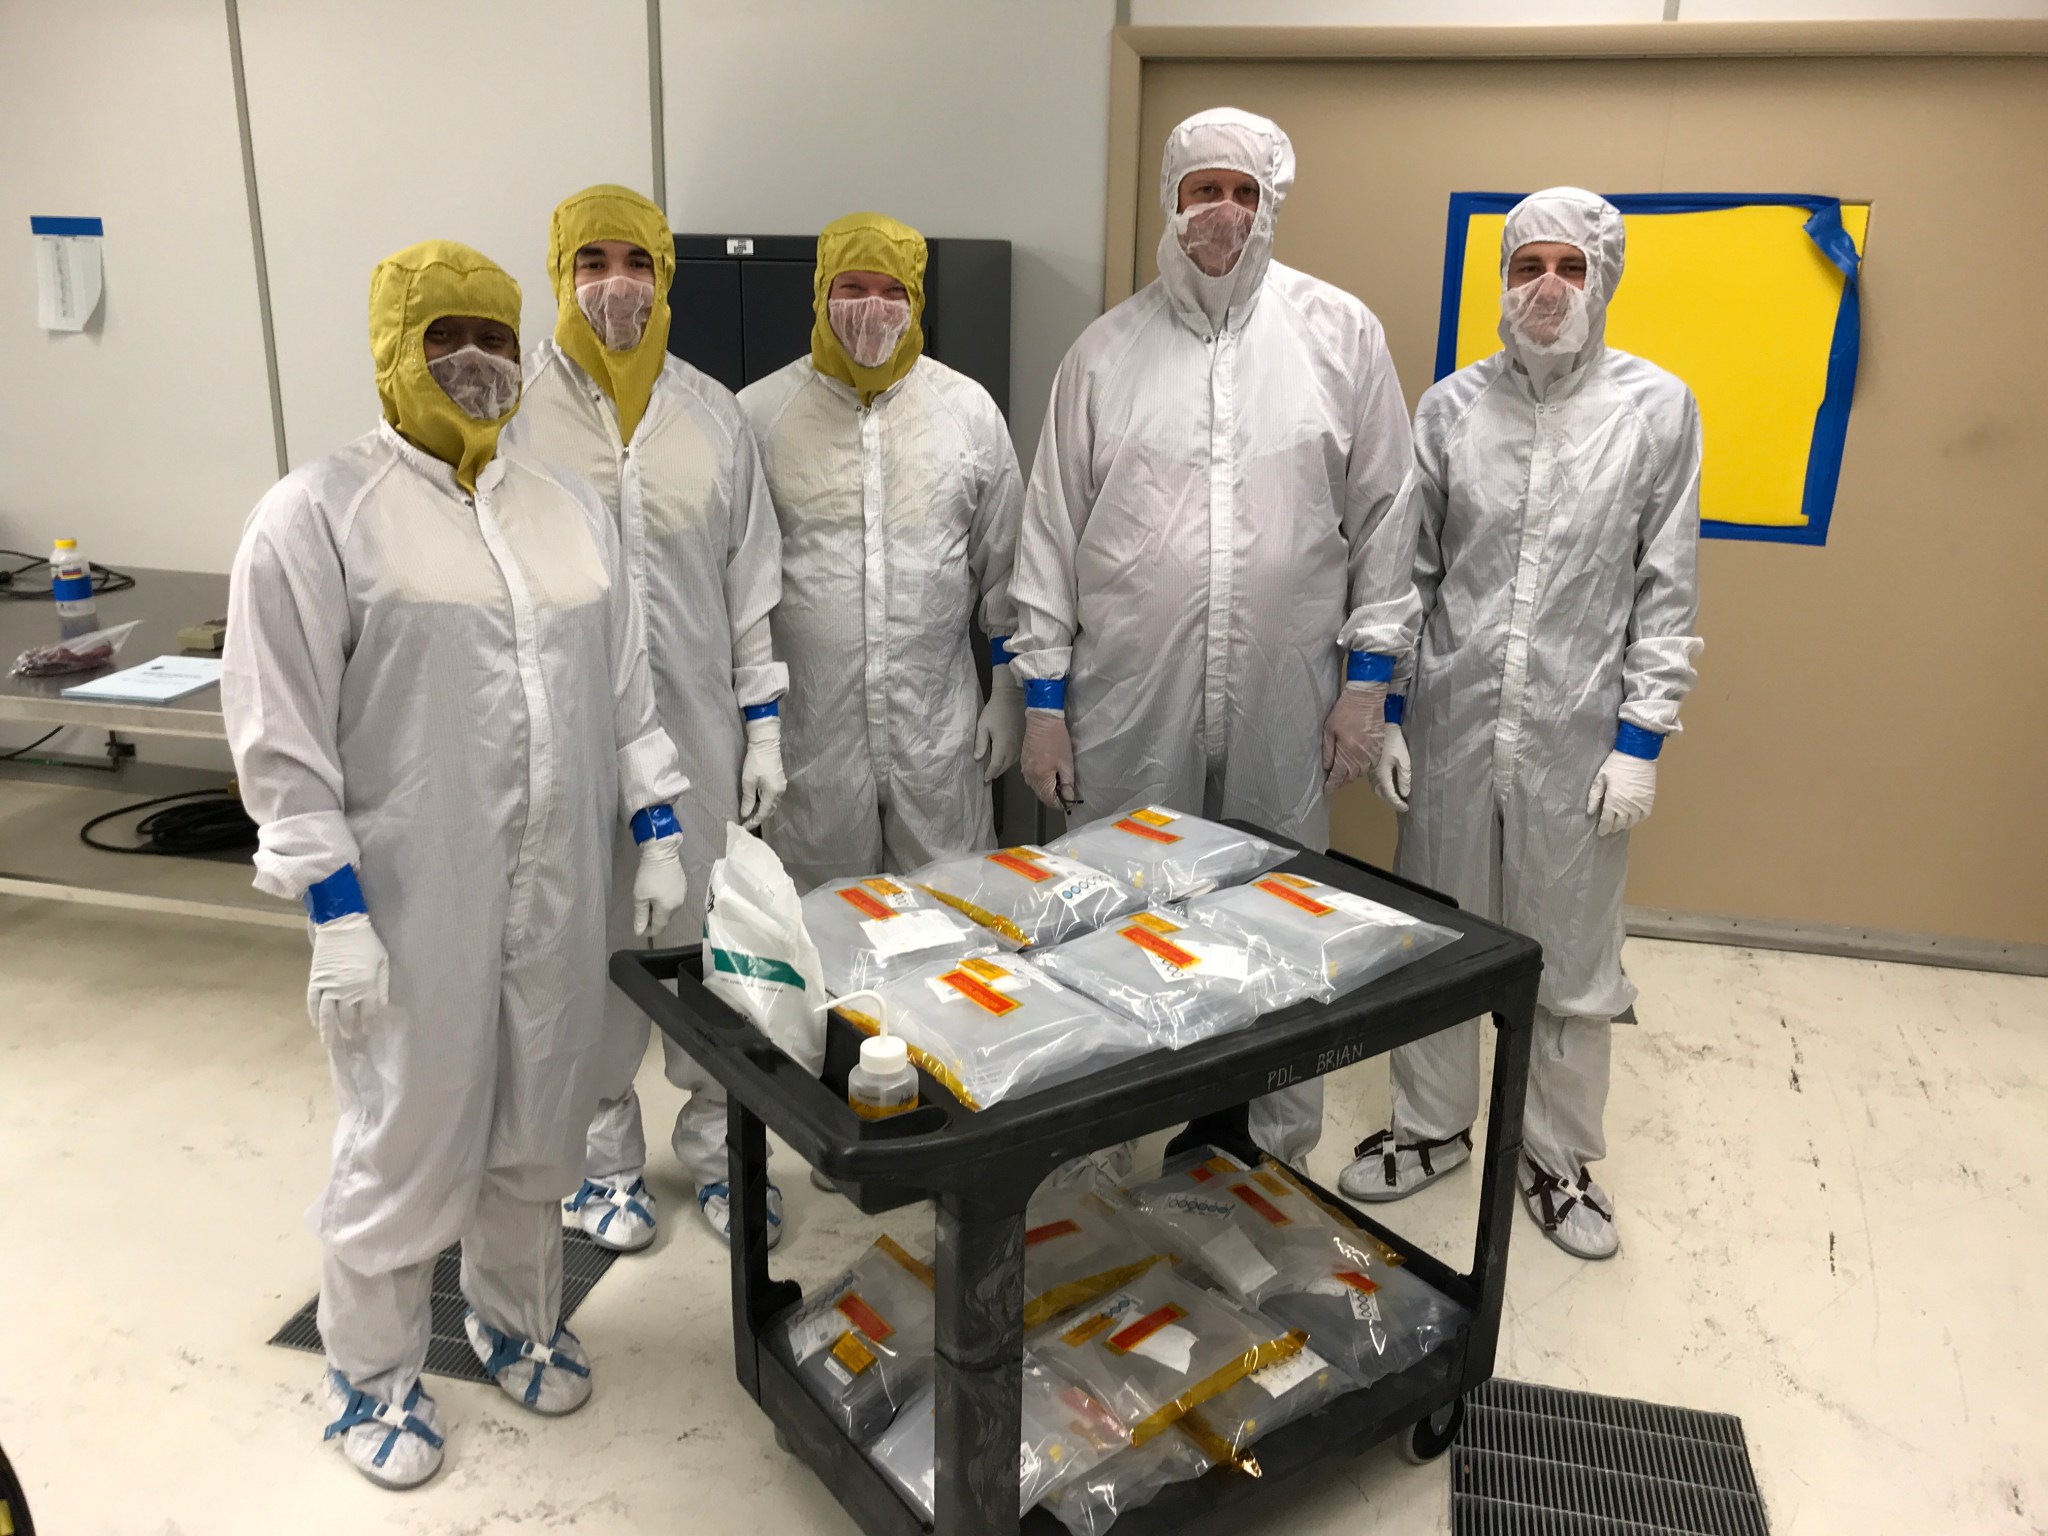 Researchers at NASA Ames received delivery of MEDLI2 hardware from NASA Langley